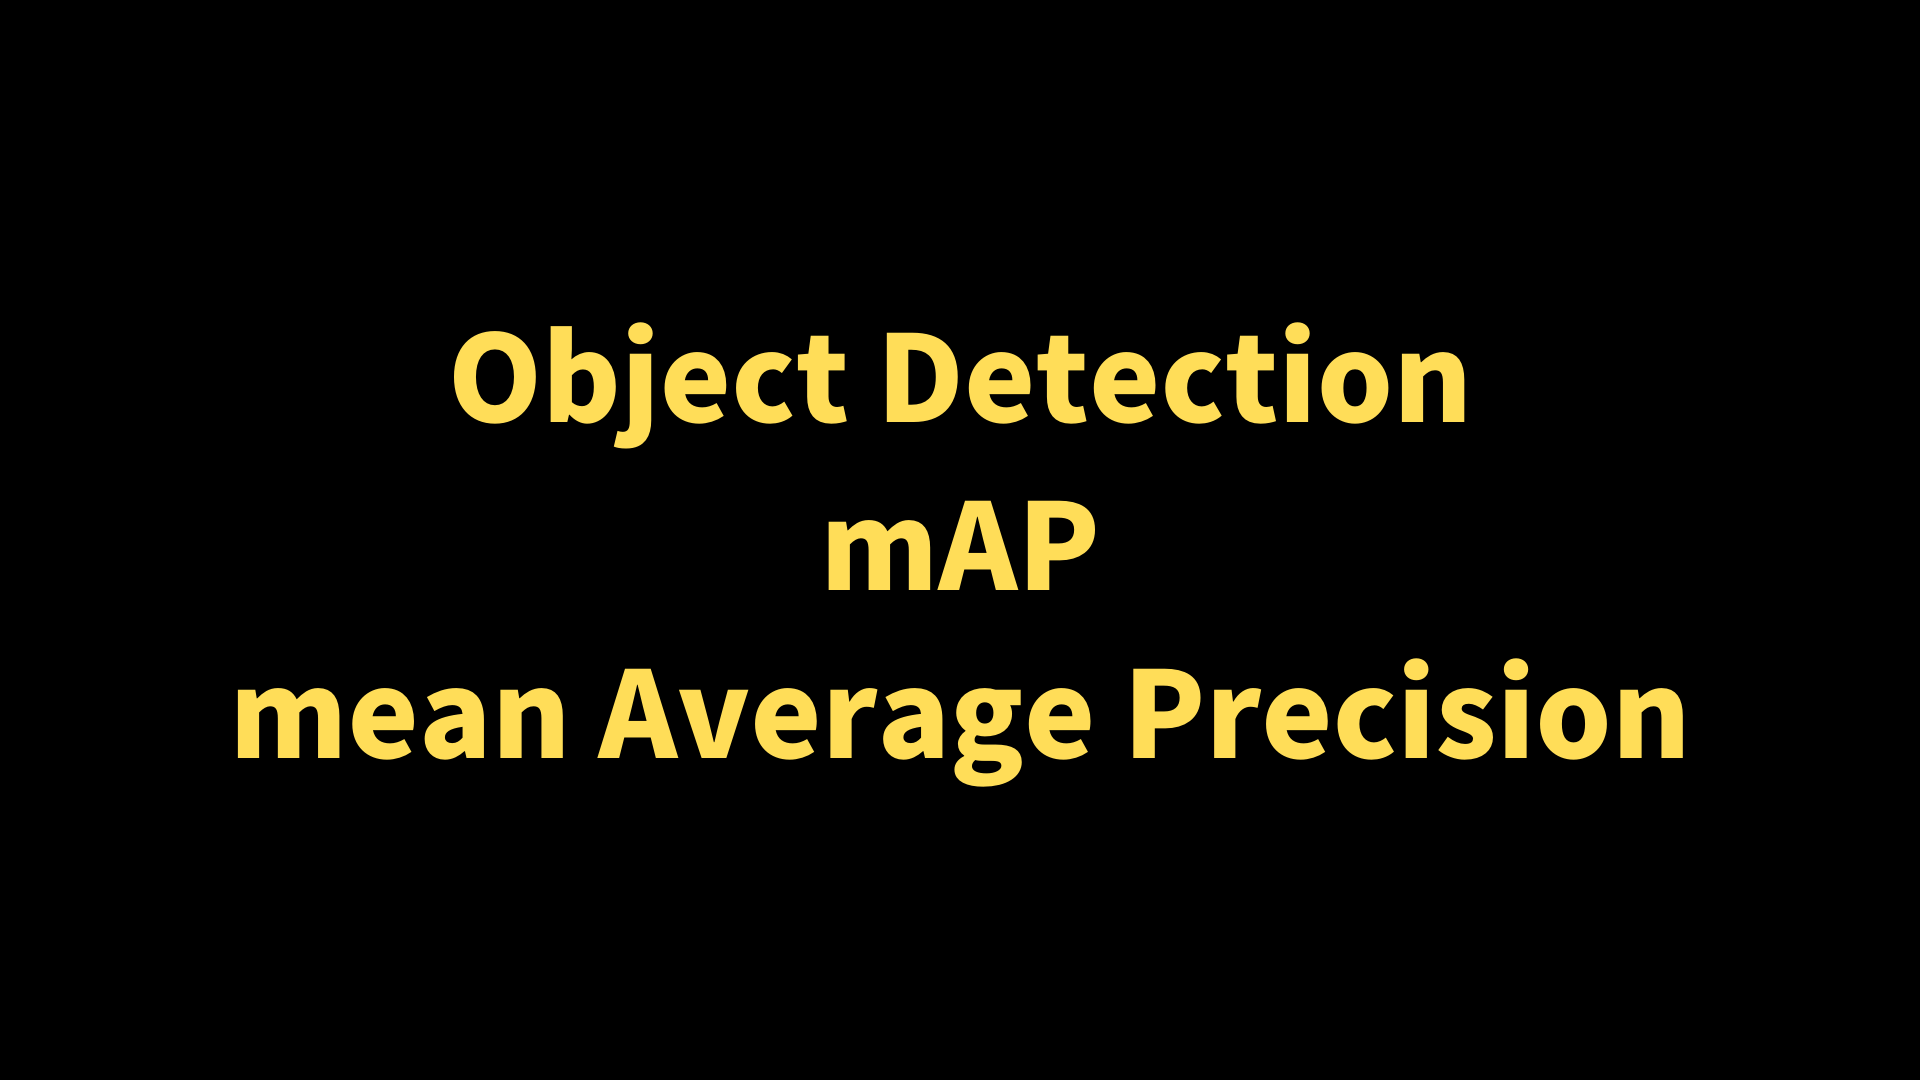 Object Detection: Calculating mean Average Precision (mAP) with Confidence